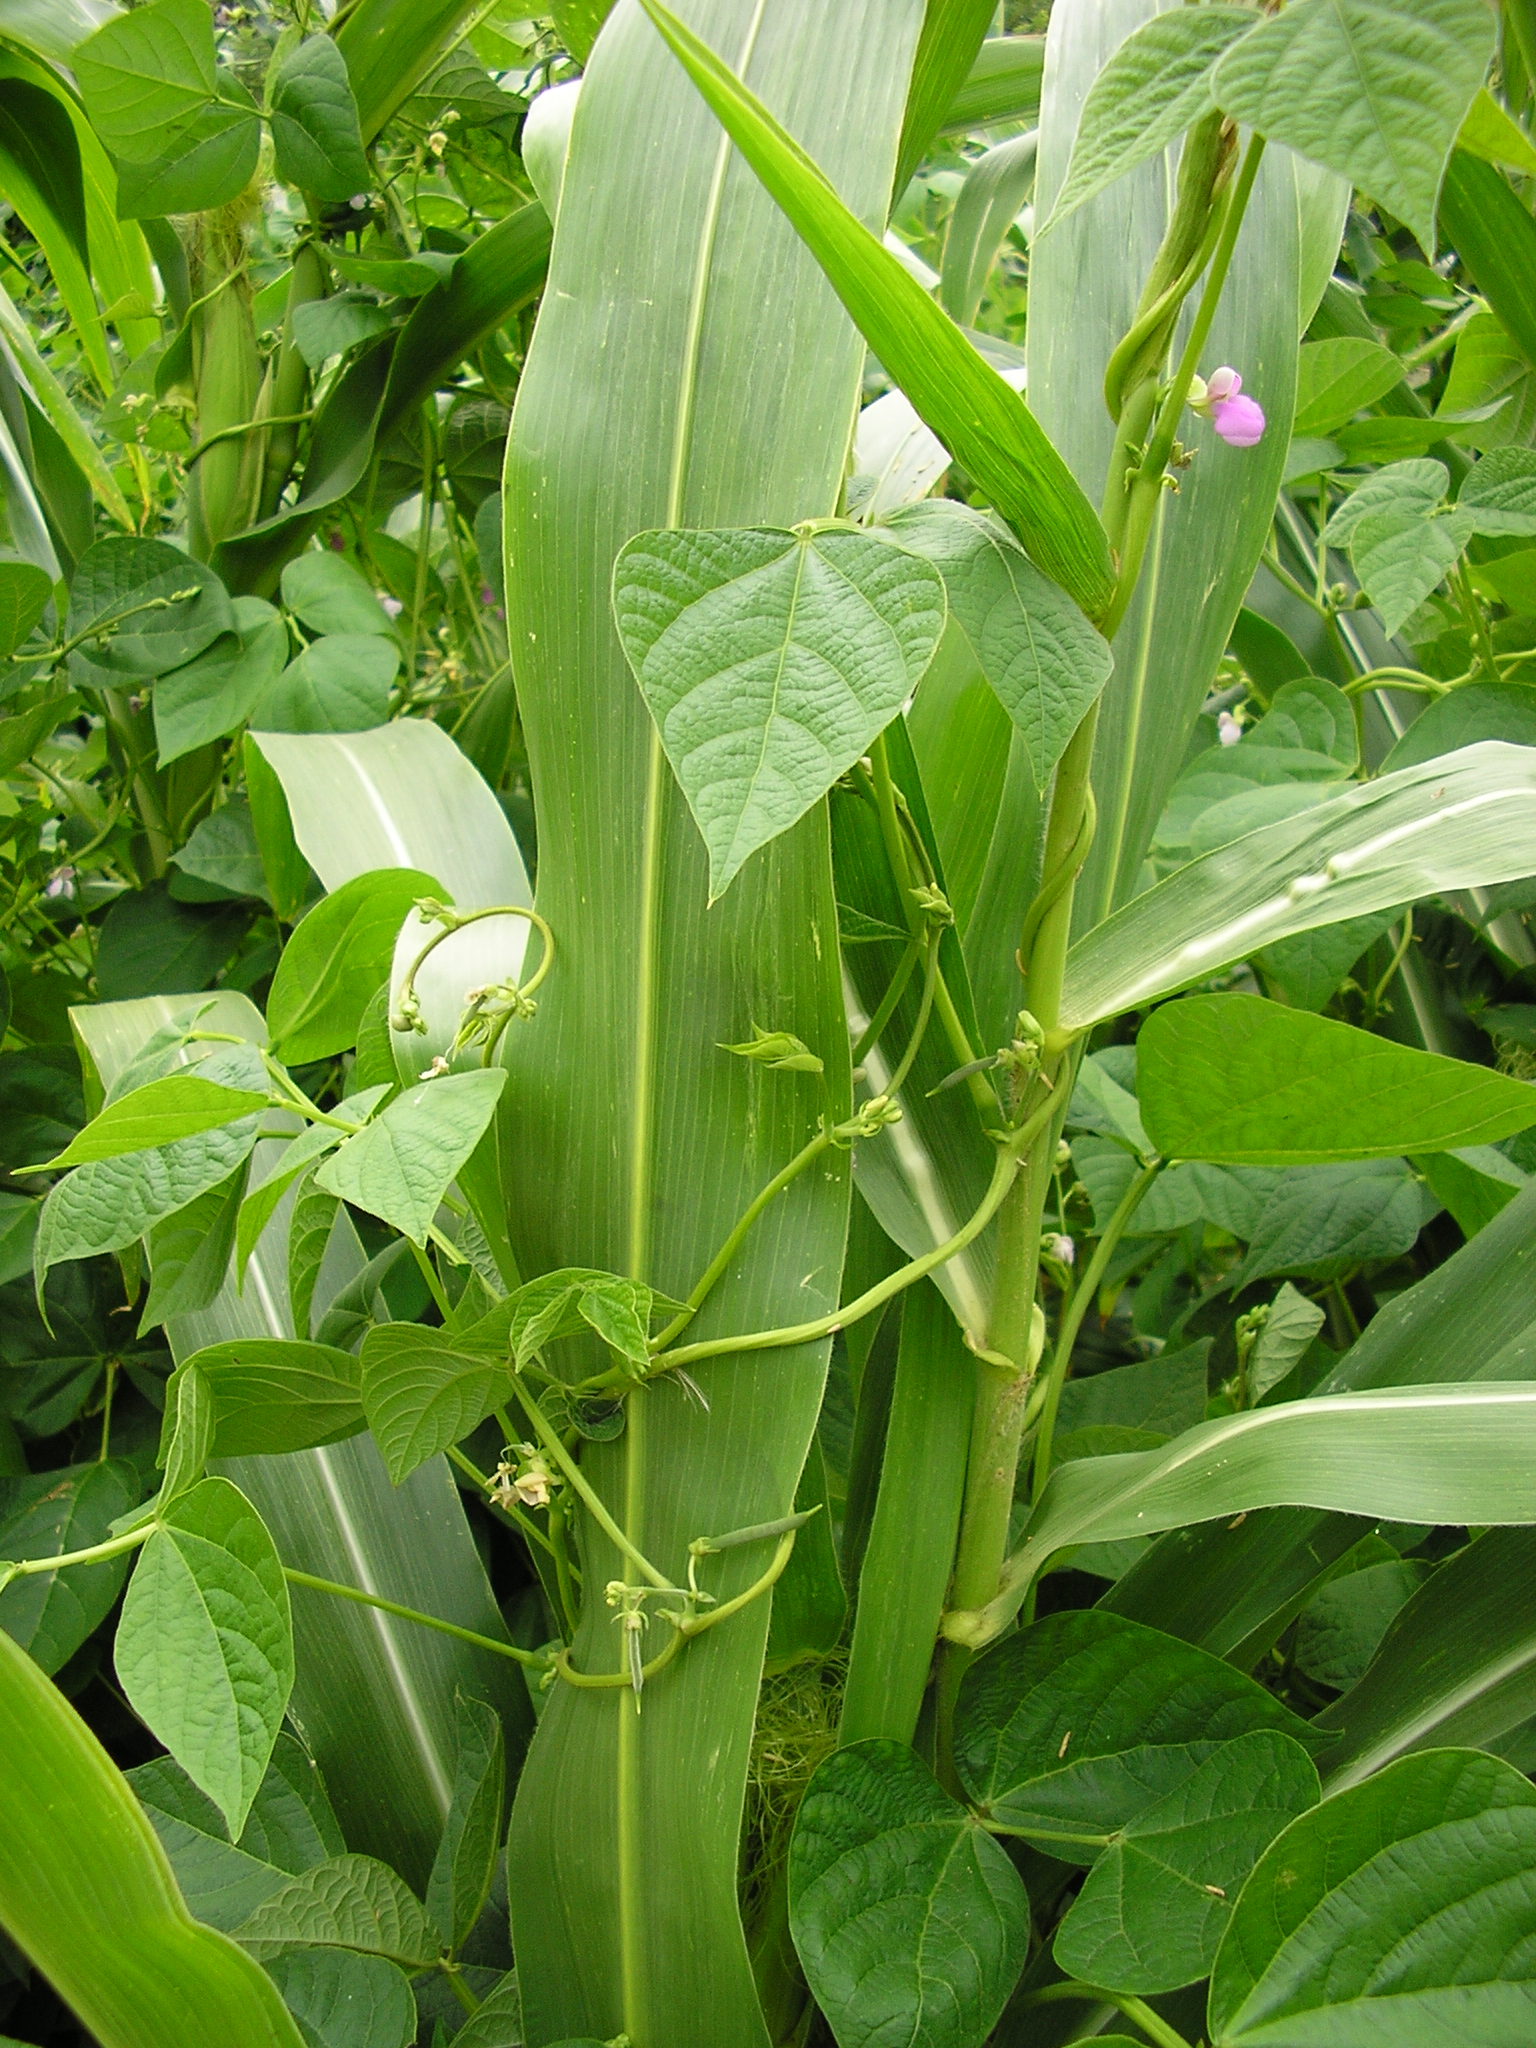 Maize intercropped with beans. Luis Manuel Peña